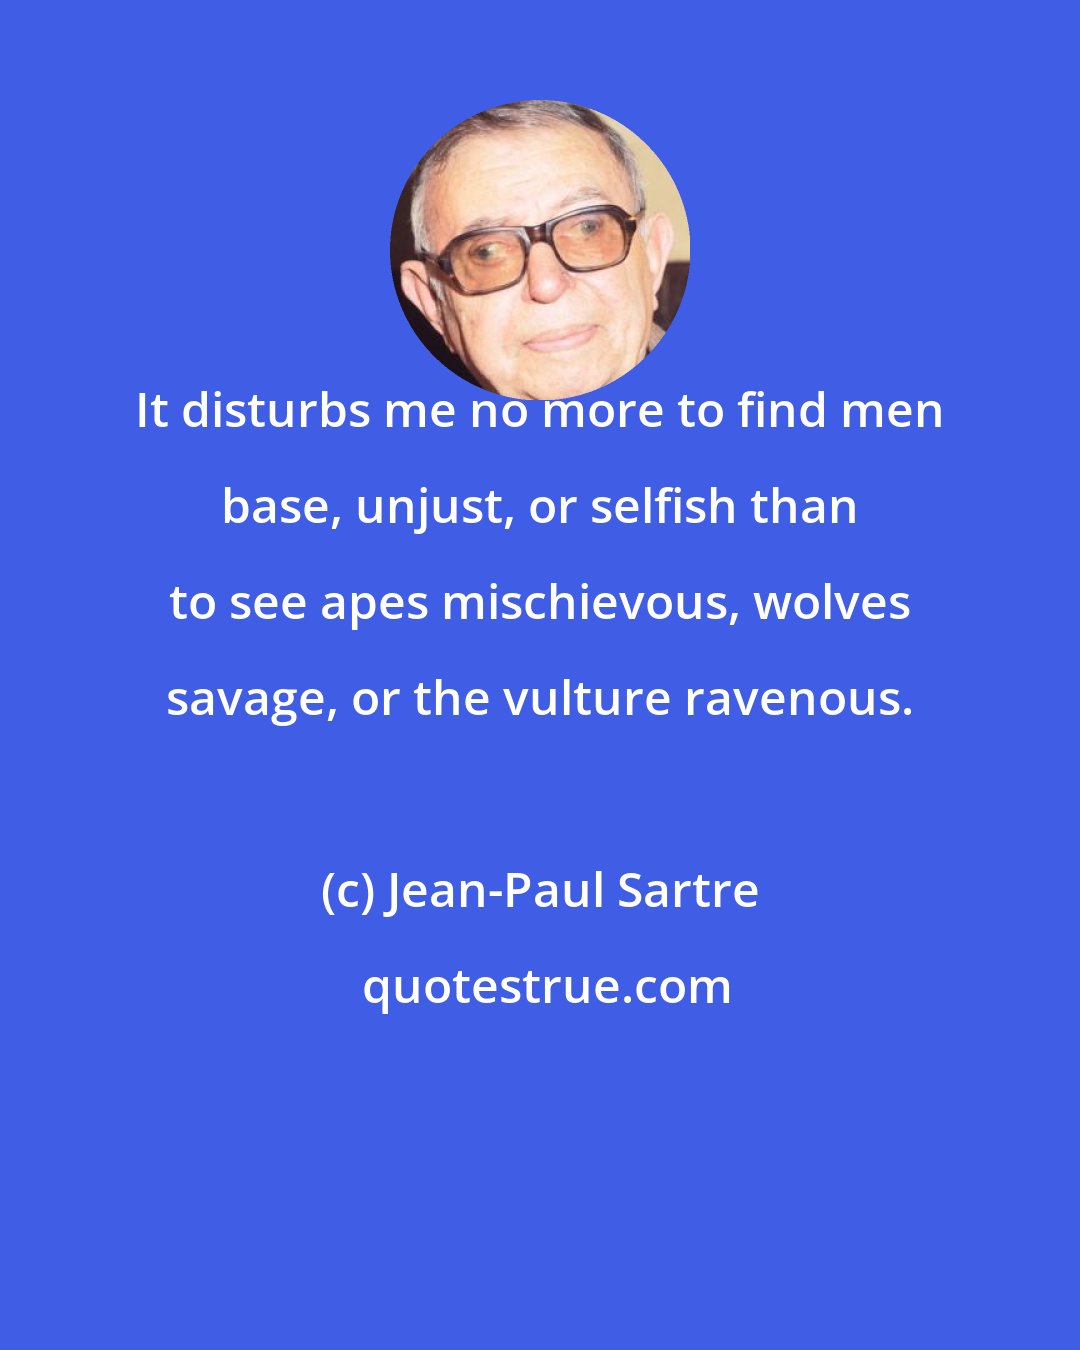 Jean-Paul Sartre: It disturbs me no more to find men base, unjust, or selfish than to see apes mischievous, wolves savage, or the vulture ravenous.